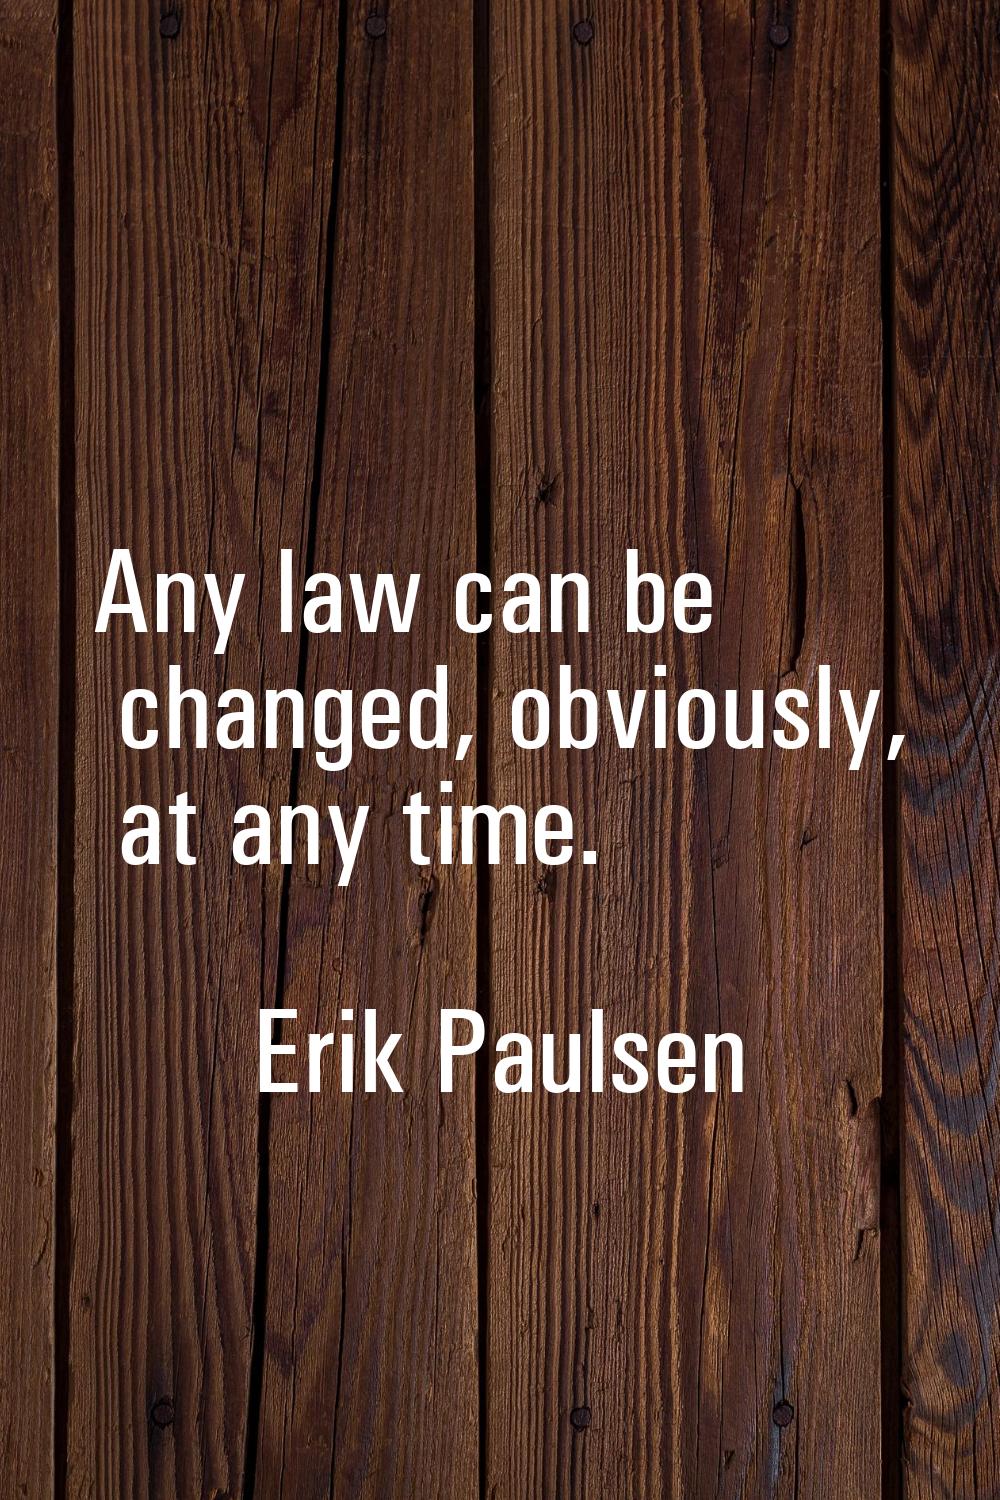 Any law can be changed, obviously, at any time.